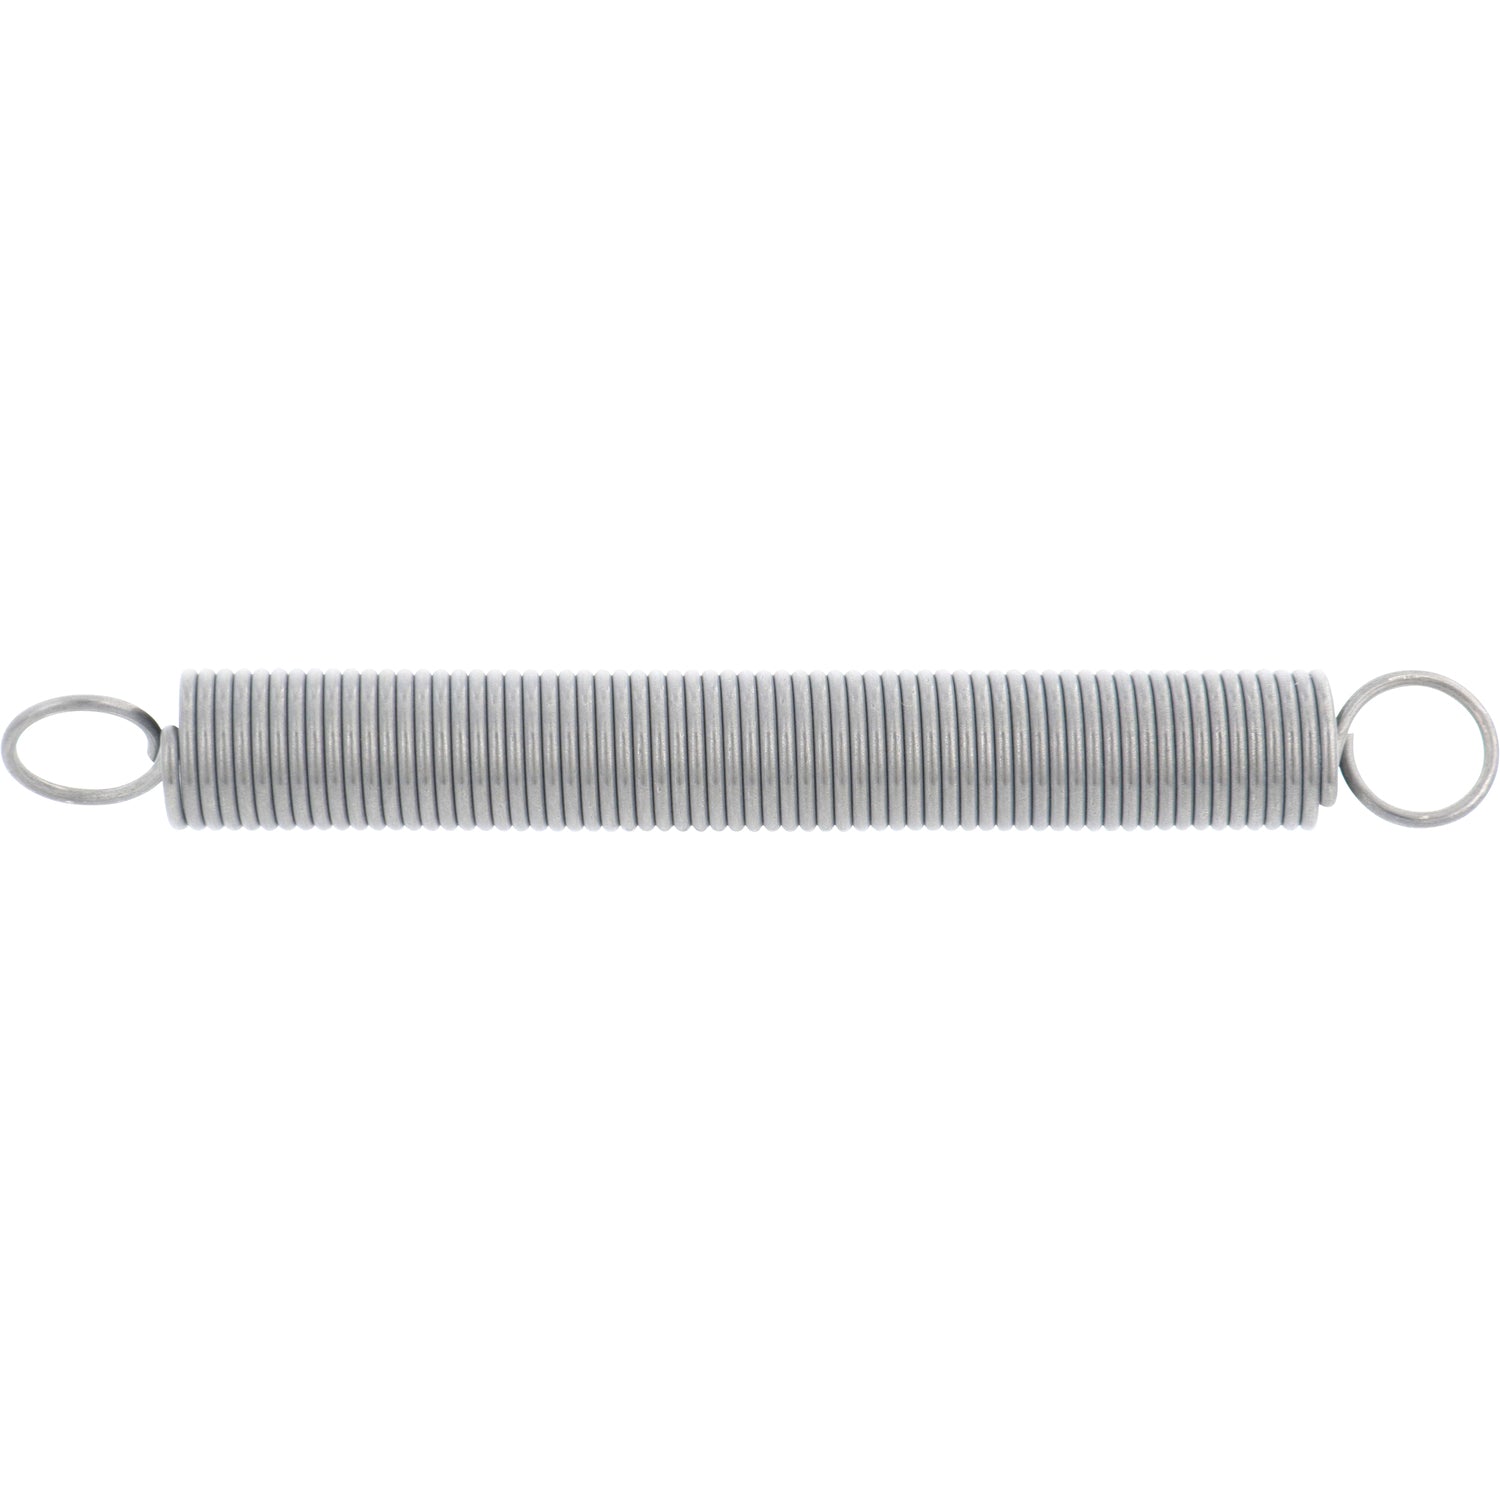 4 inch, 302 Stainless-steel extension spring with loop ends on white background. 94135K28